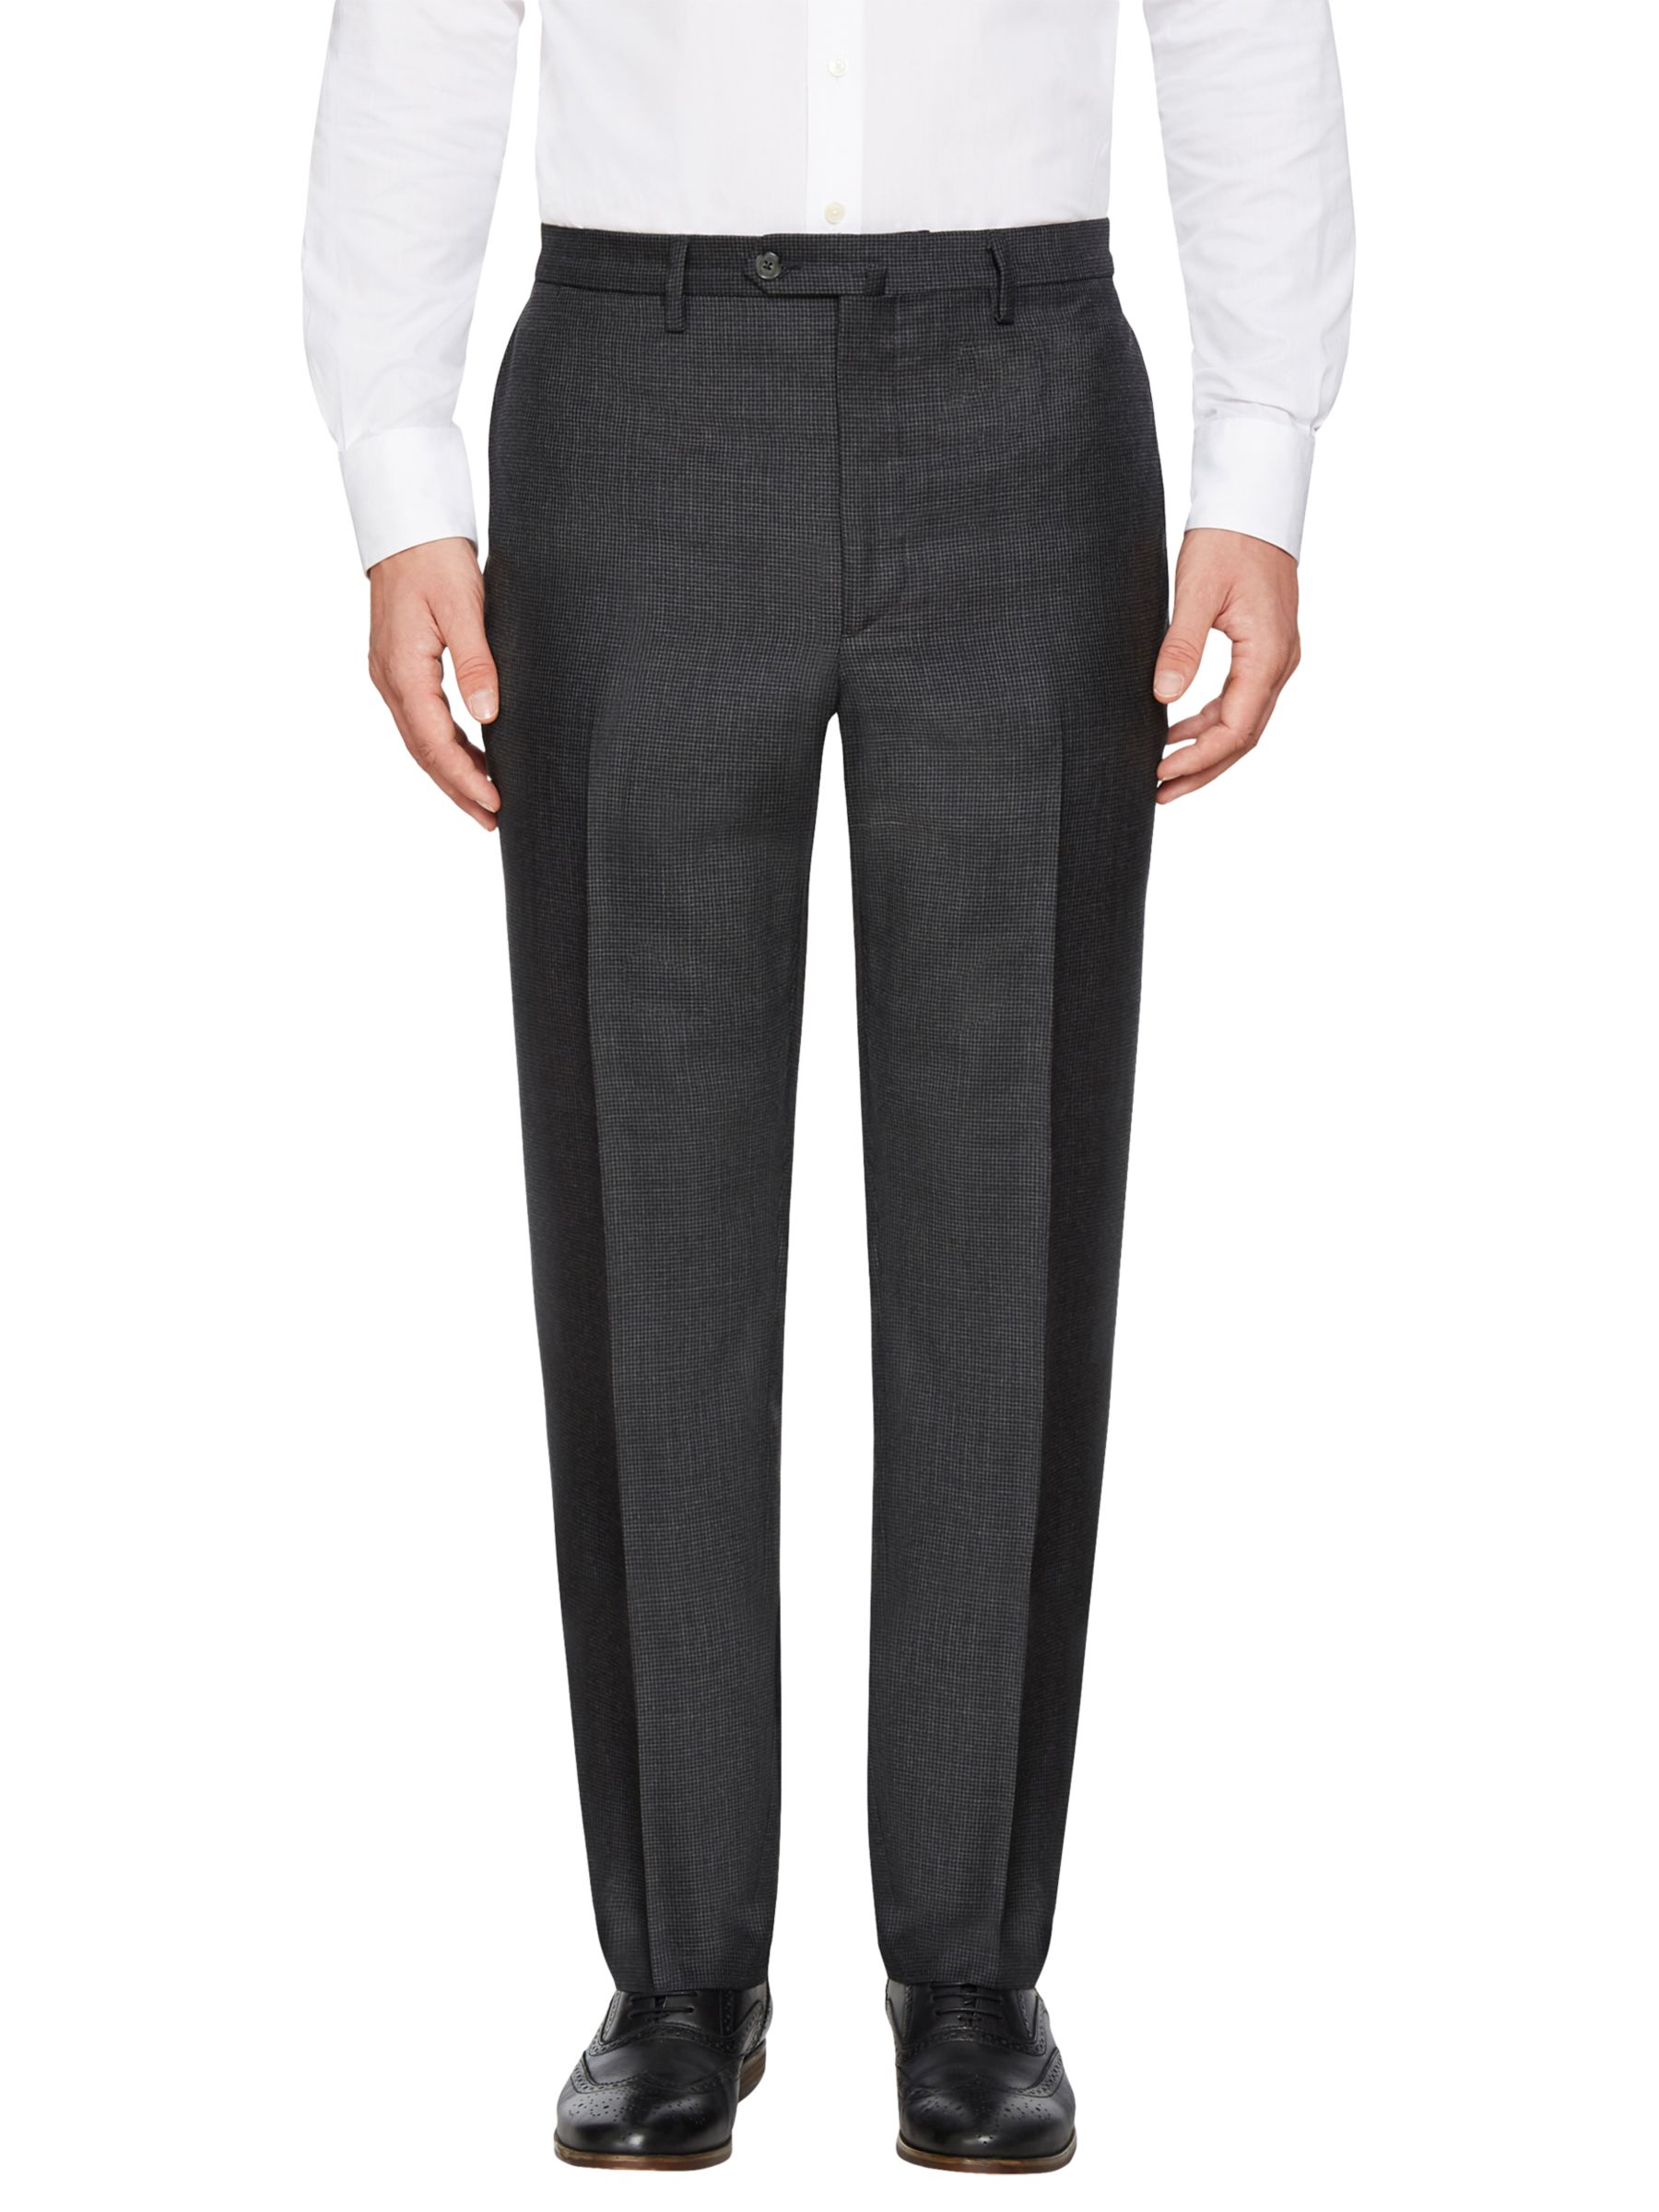 Hackett London Wool Puppytooth Regular Fit Suit Trousers, Charcoal, 34R